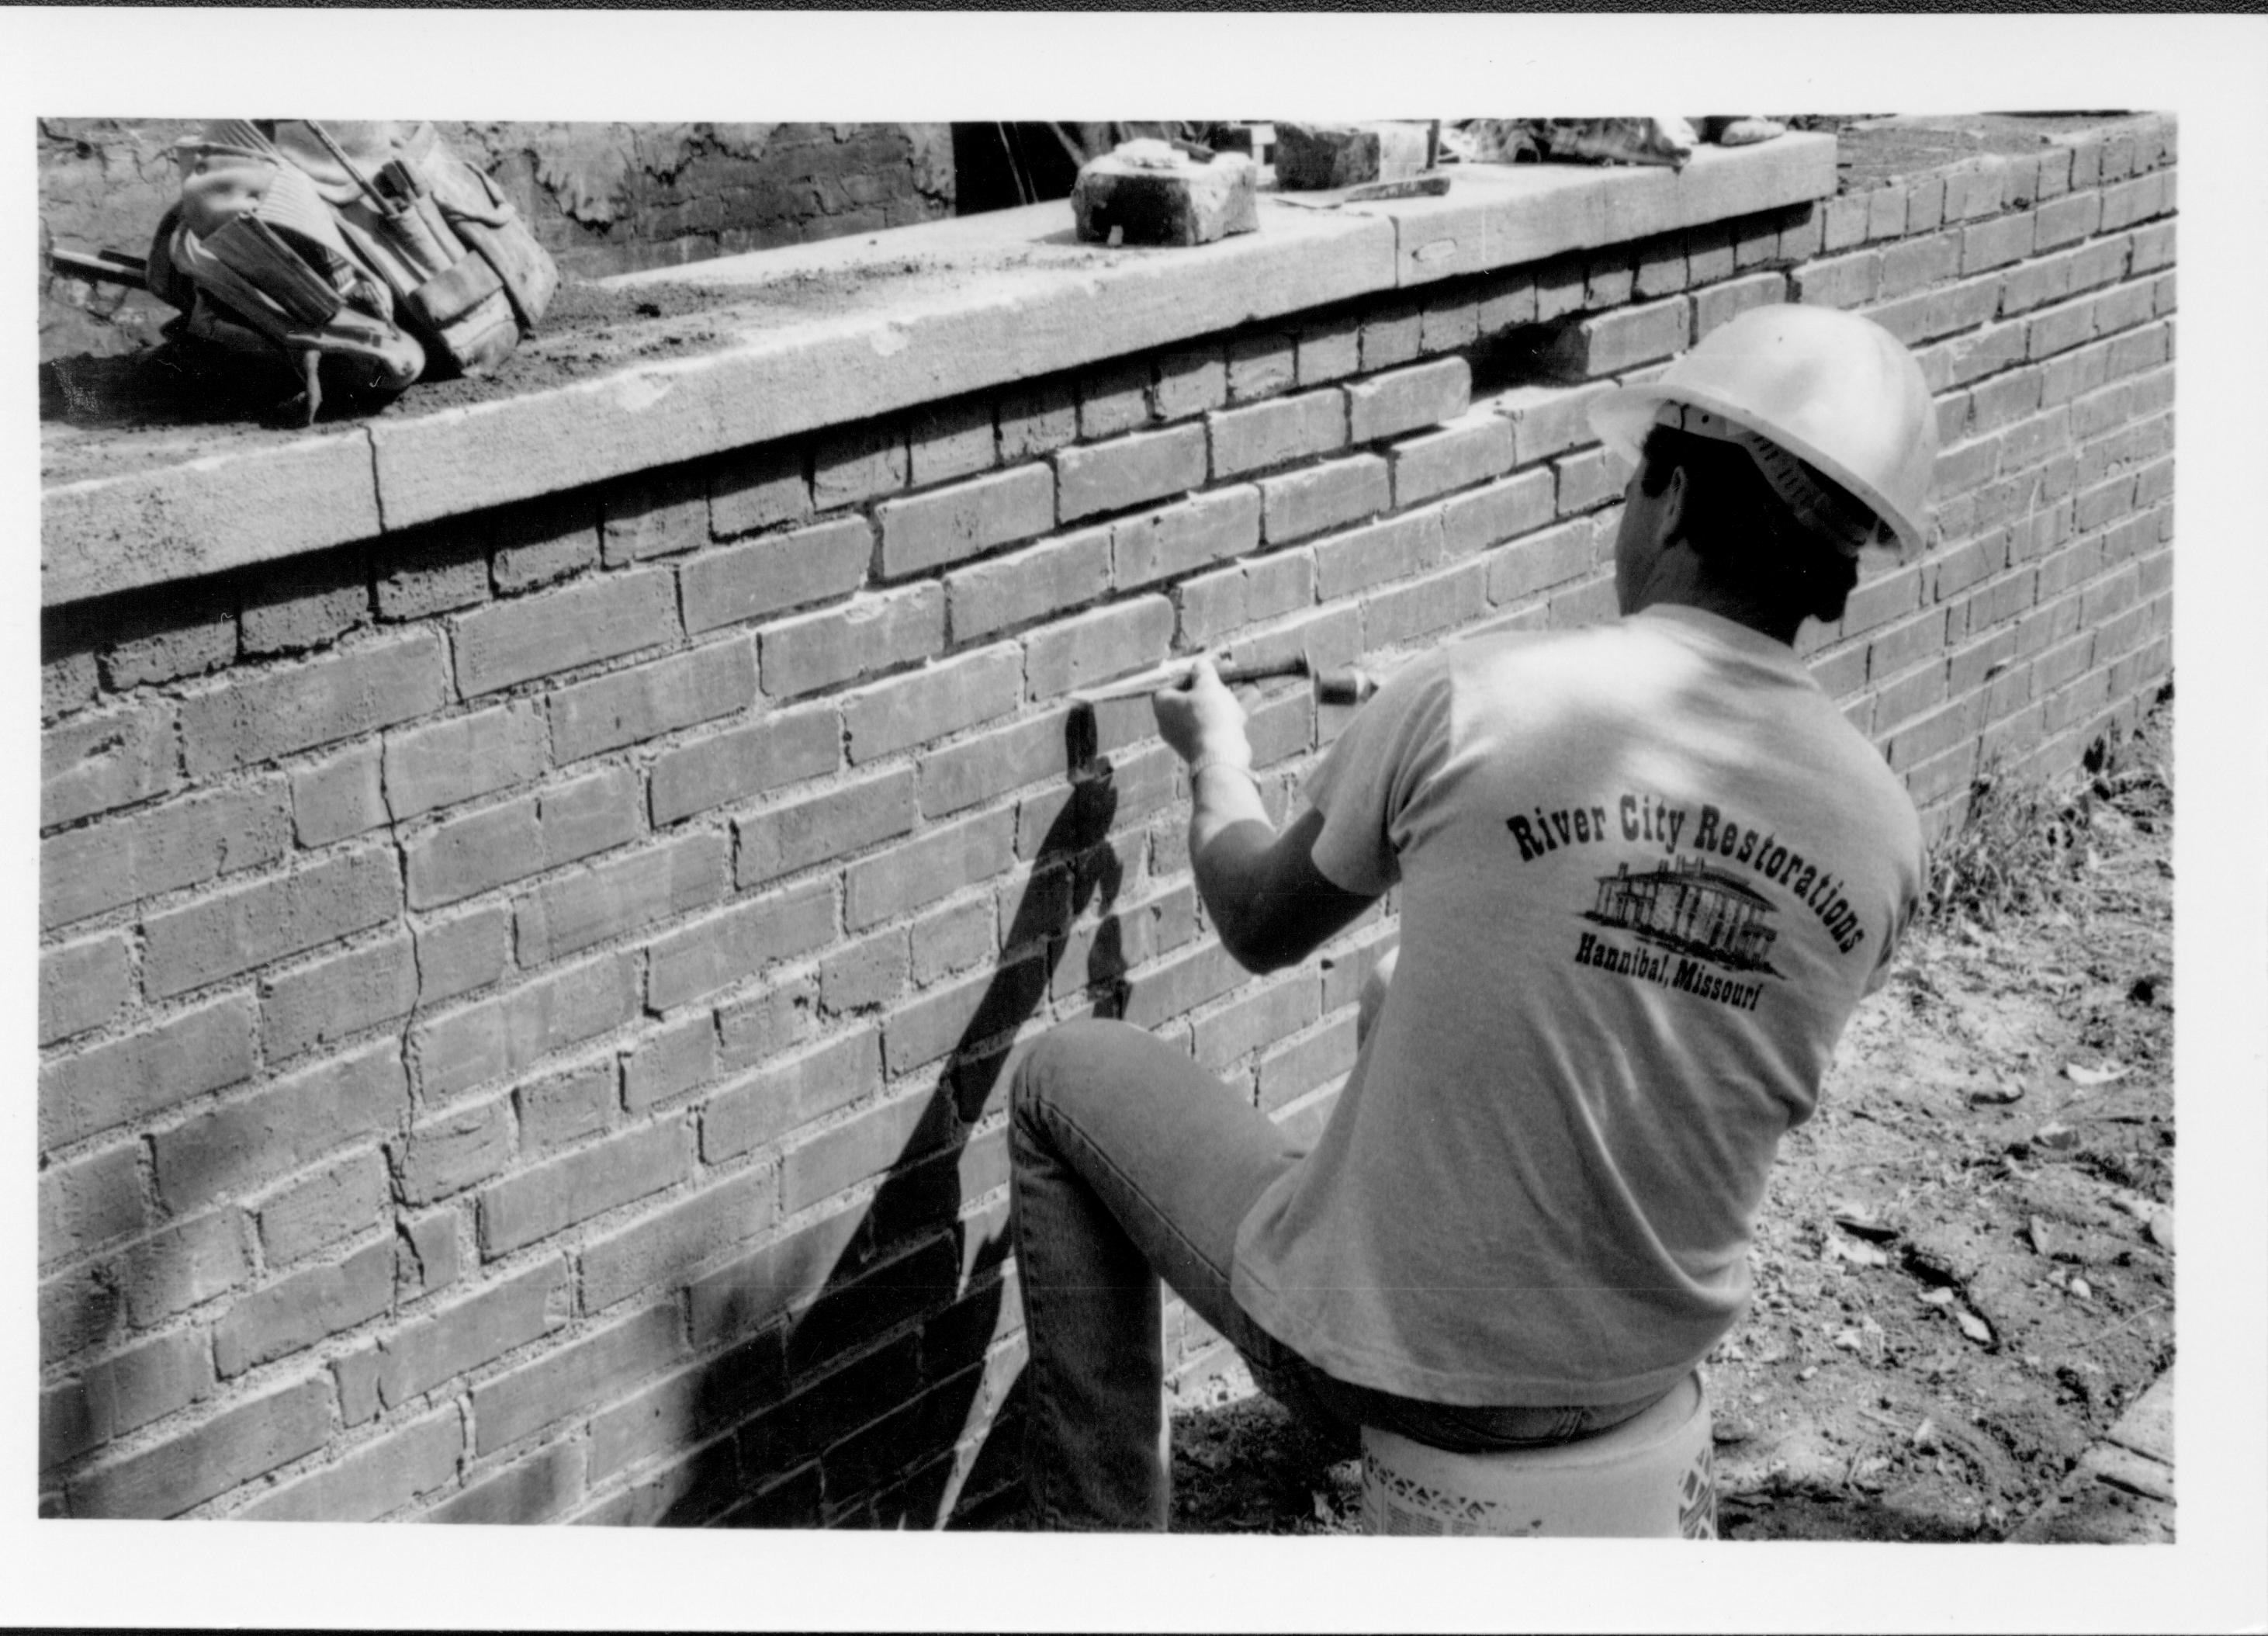 A worker from River City Restorations removes mortar from the retaining wall of the Lincoln Home, inpreparation for restoration/repair work.